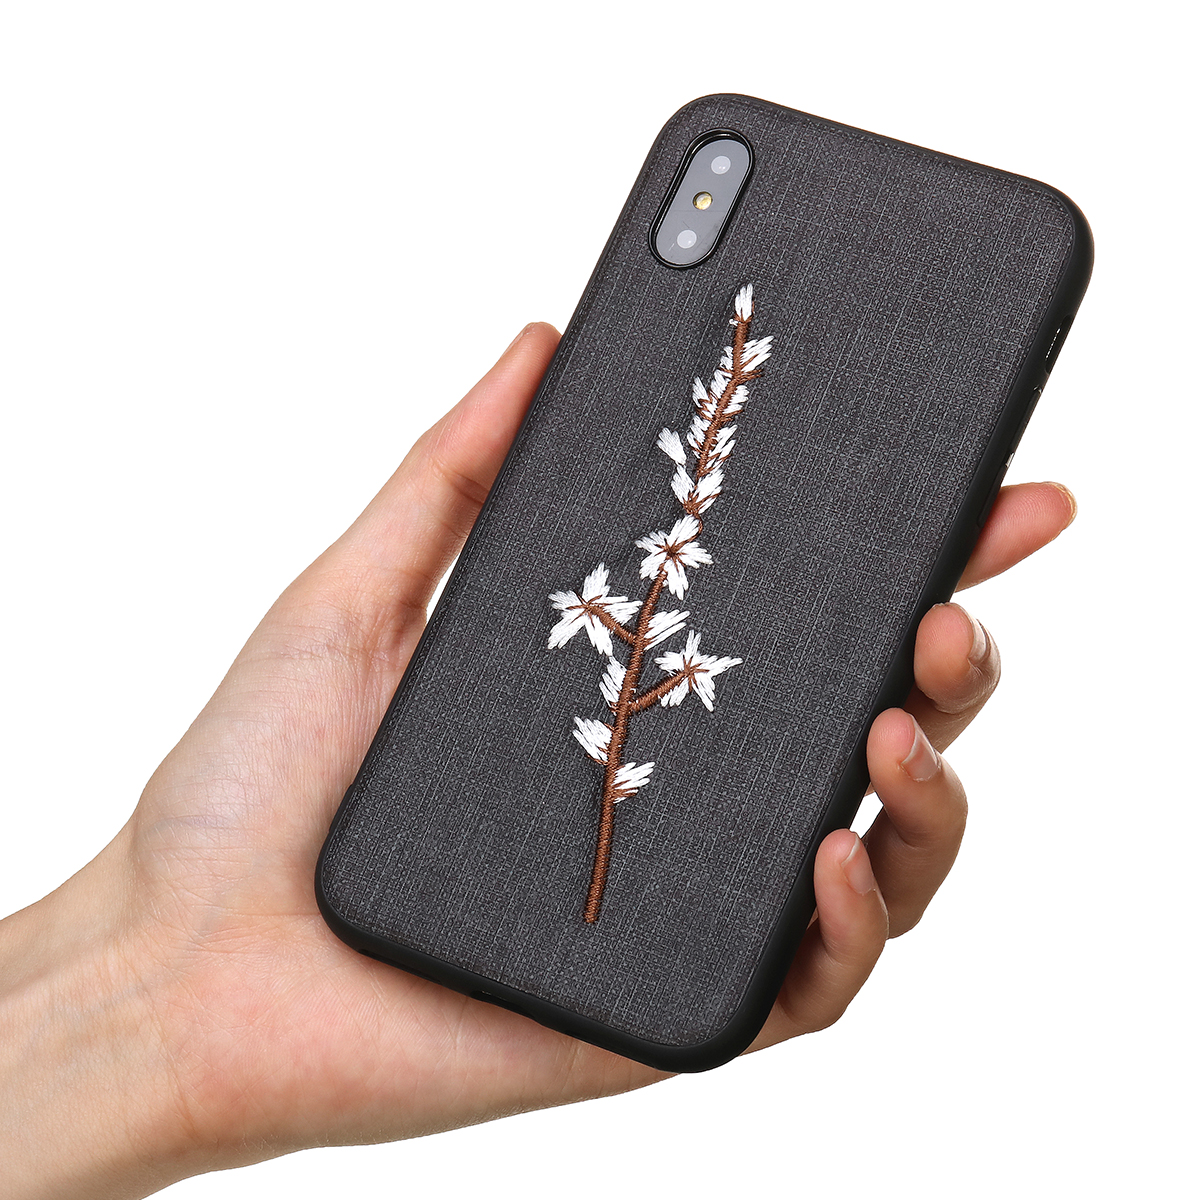 AUGIENB-Embroidery-Cloth-Shockproof-Protective-Case-For-iPhone-XXS88-Plus77-Plus6s6s-Plus-1397766